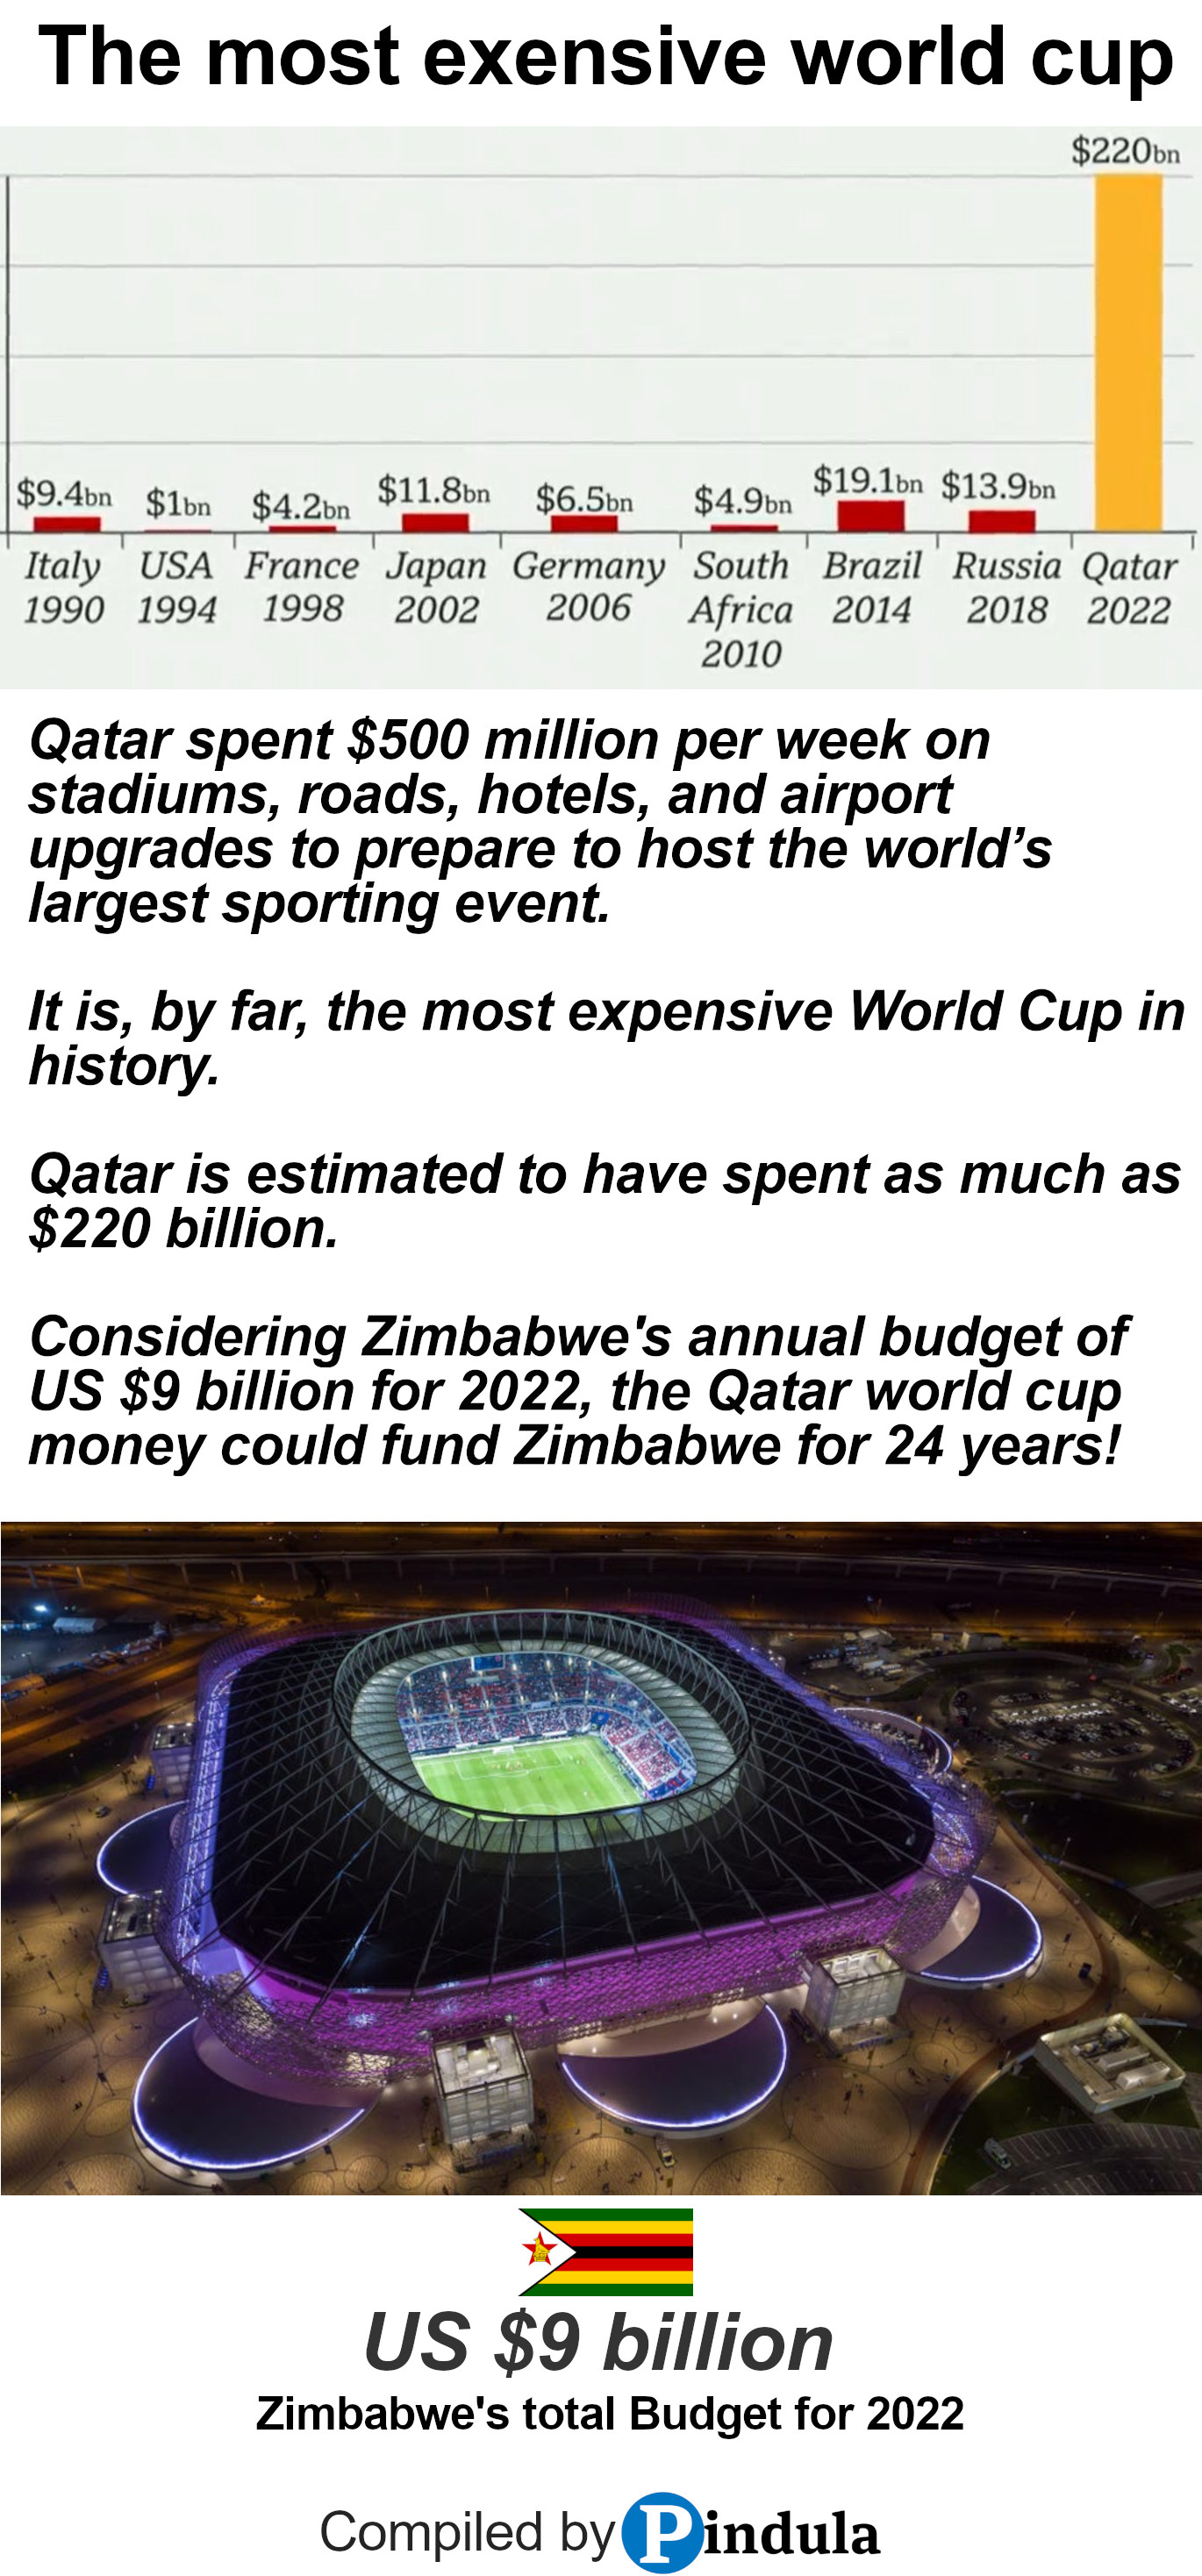 The Qatar World Cup preparations are estimated to have cost about $220 billion. This could fund Zimbabwe's annual budget for 24 years.